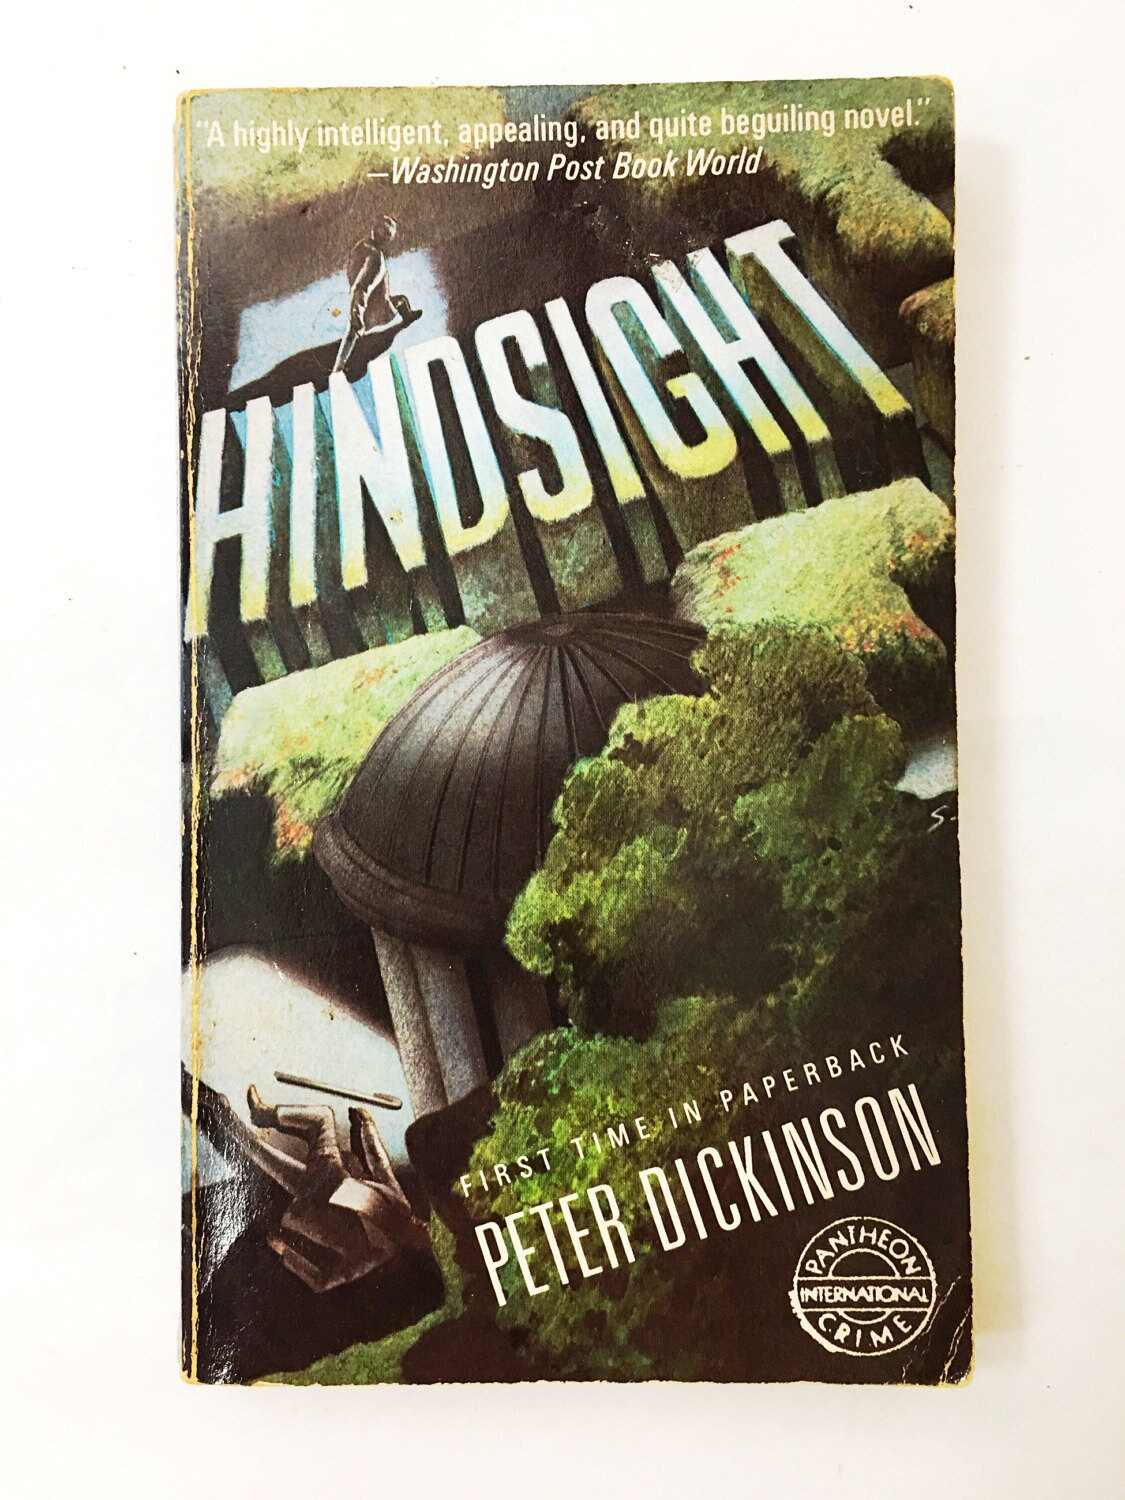 Hindsight book by Award Winner Peter Dickinson. First paperback edition. Multi-layered tale or sinister acts told through flashbacks.